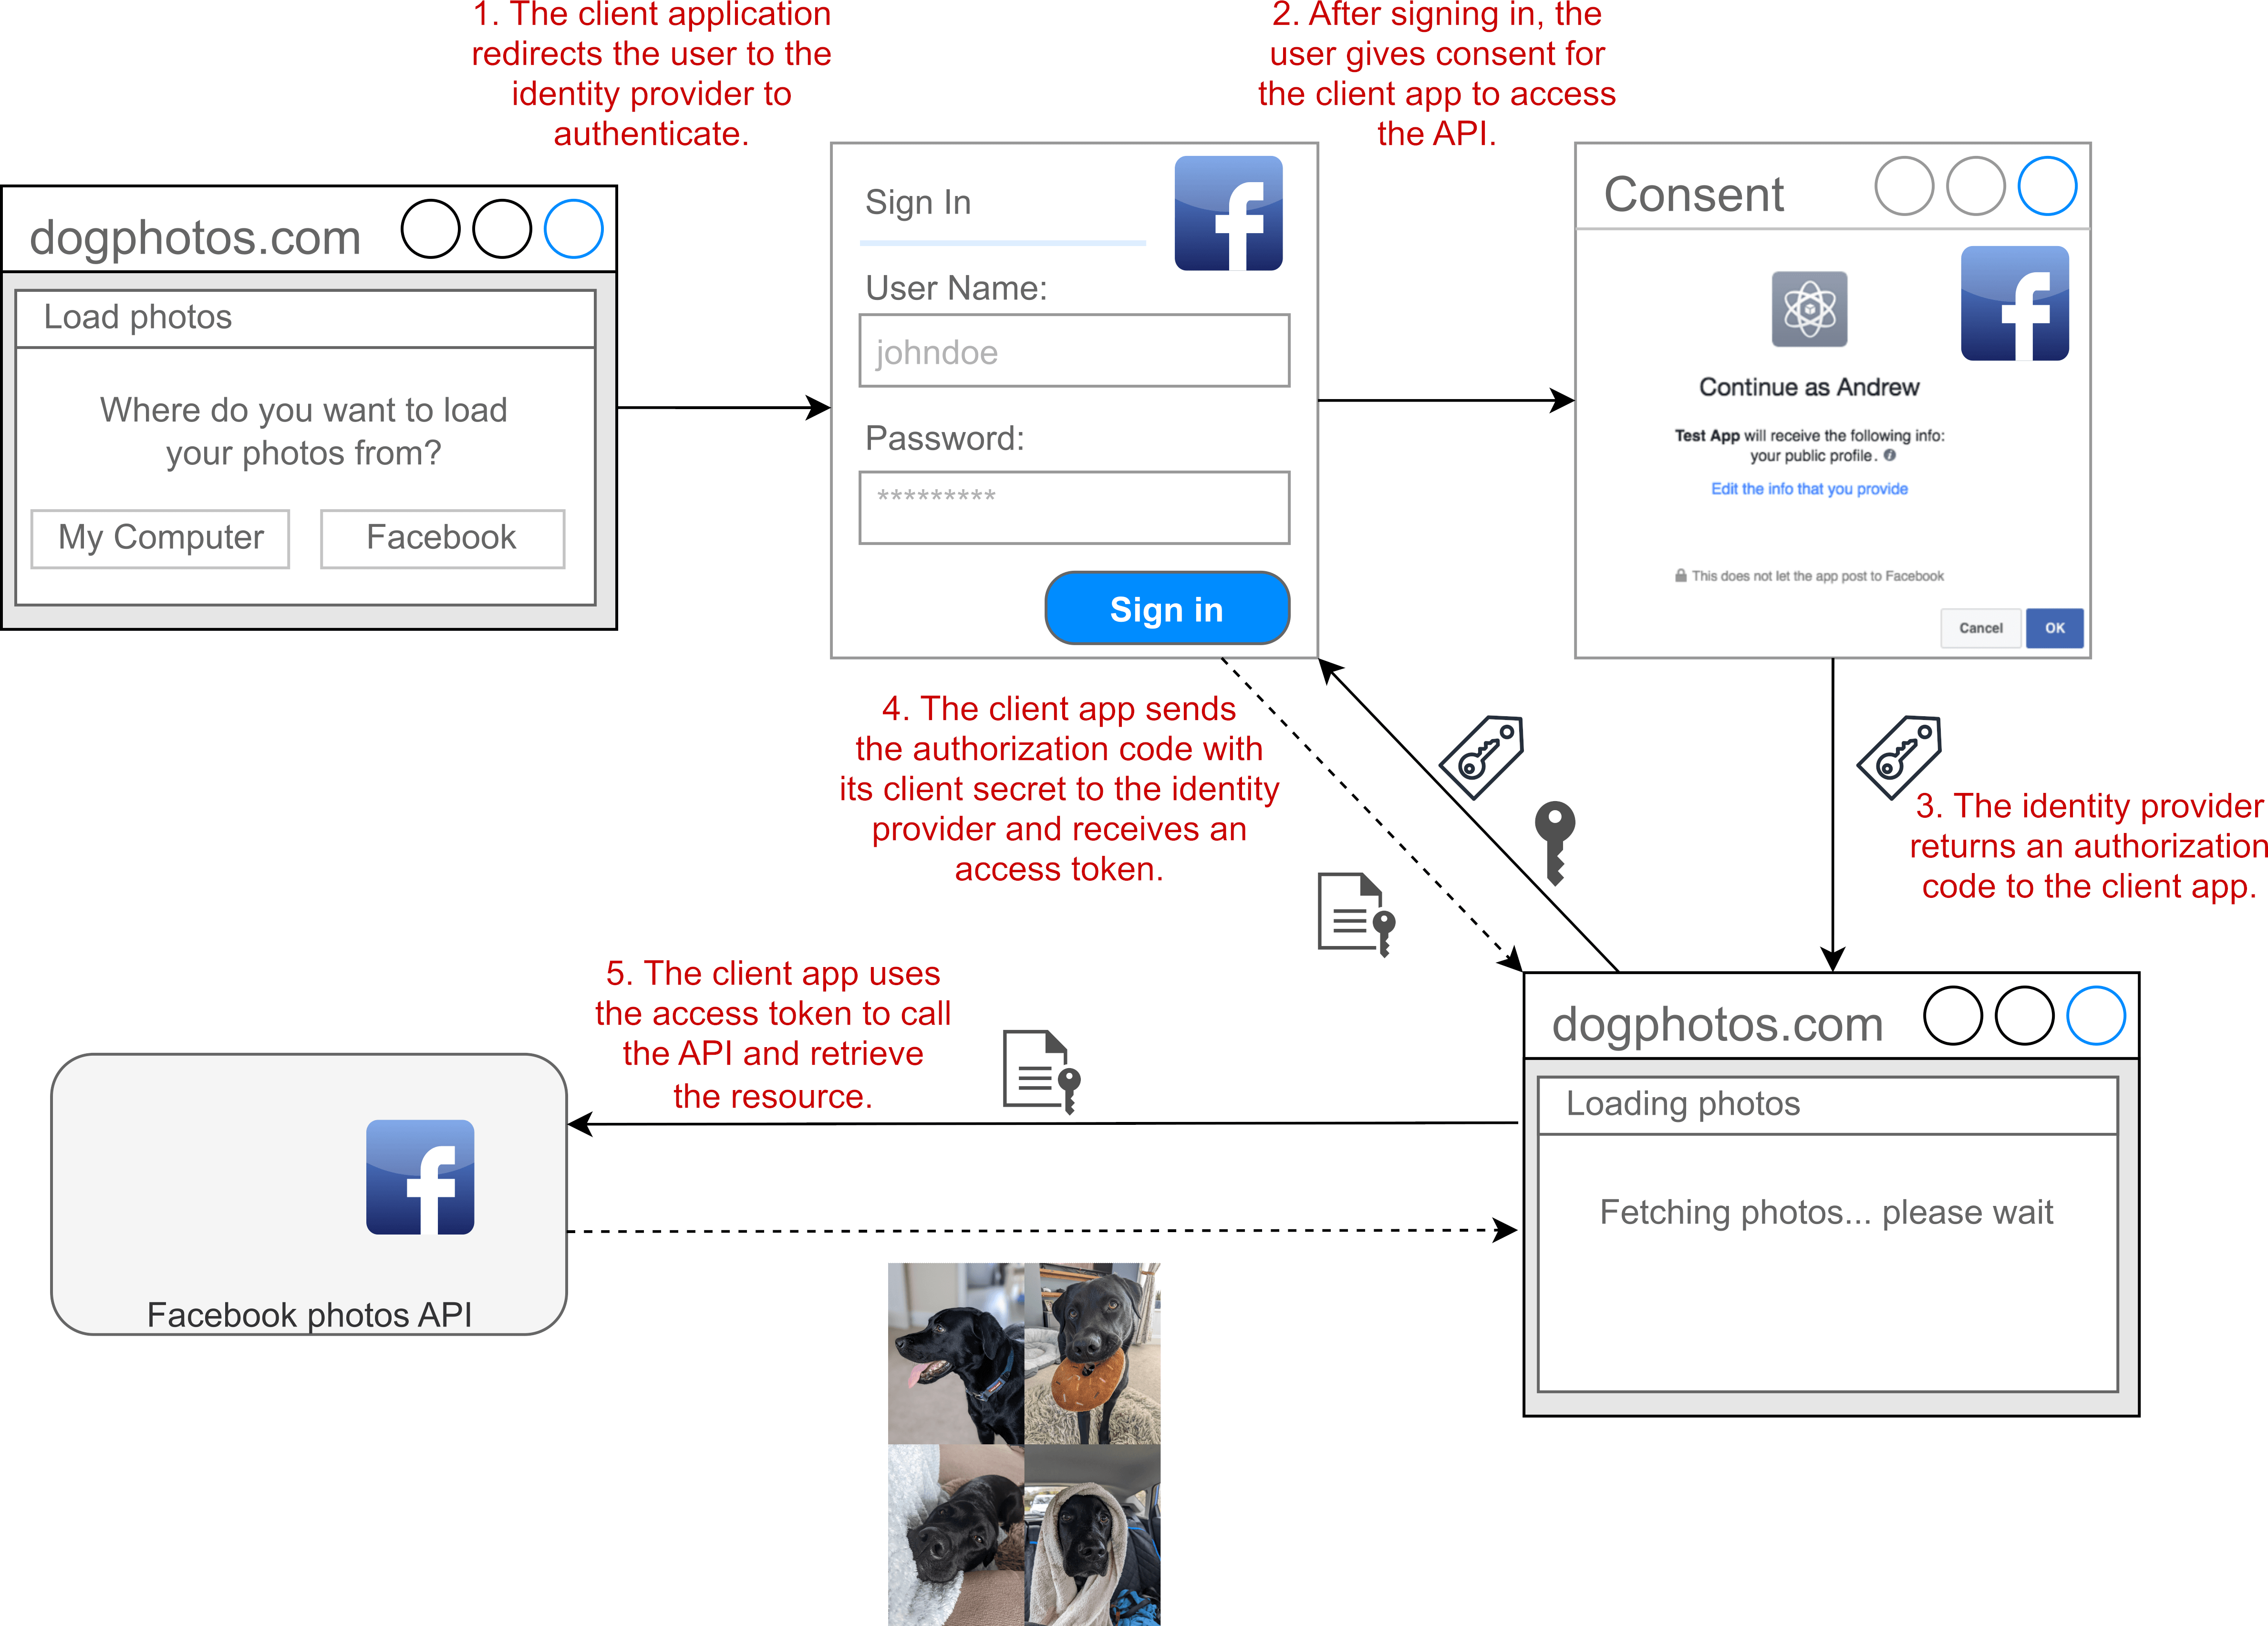 Using OAuth 2.0 to authorize dogphotos.com to access your photos on Facebook